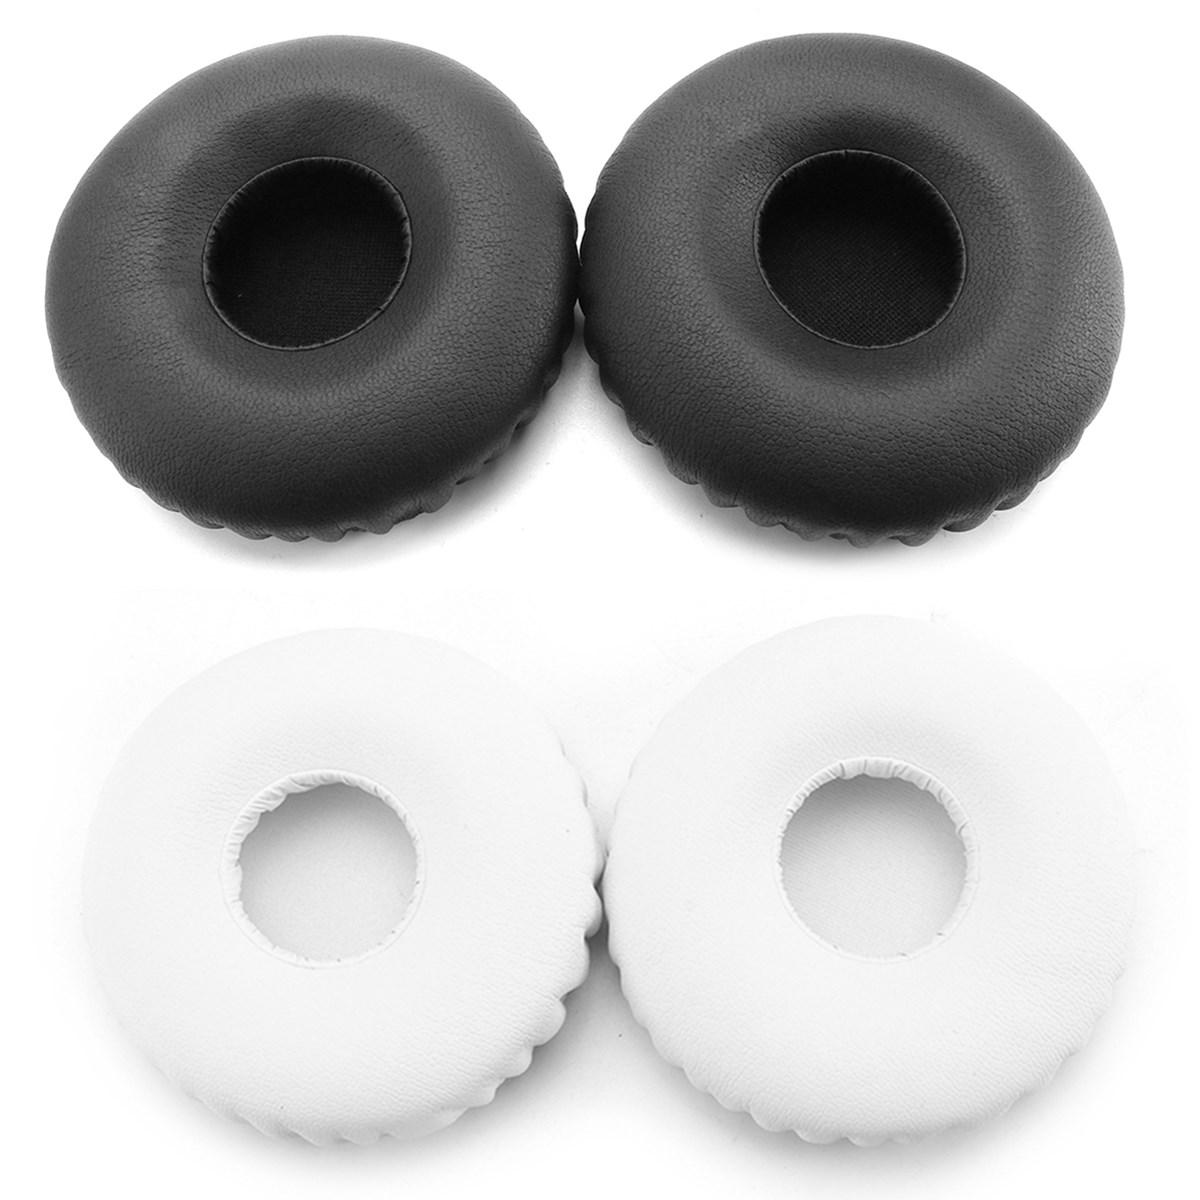 Replacement Ear pads Cushion Cover Fit For JBL E40BT E40 S400 S400BT Headphones 